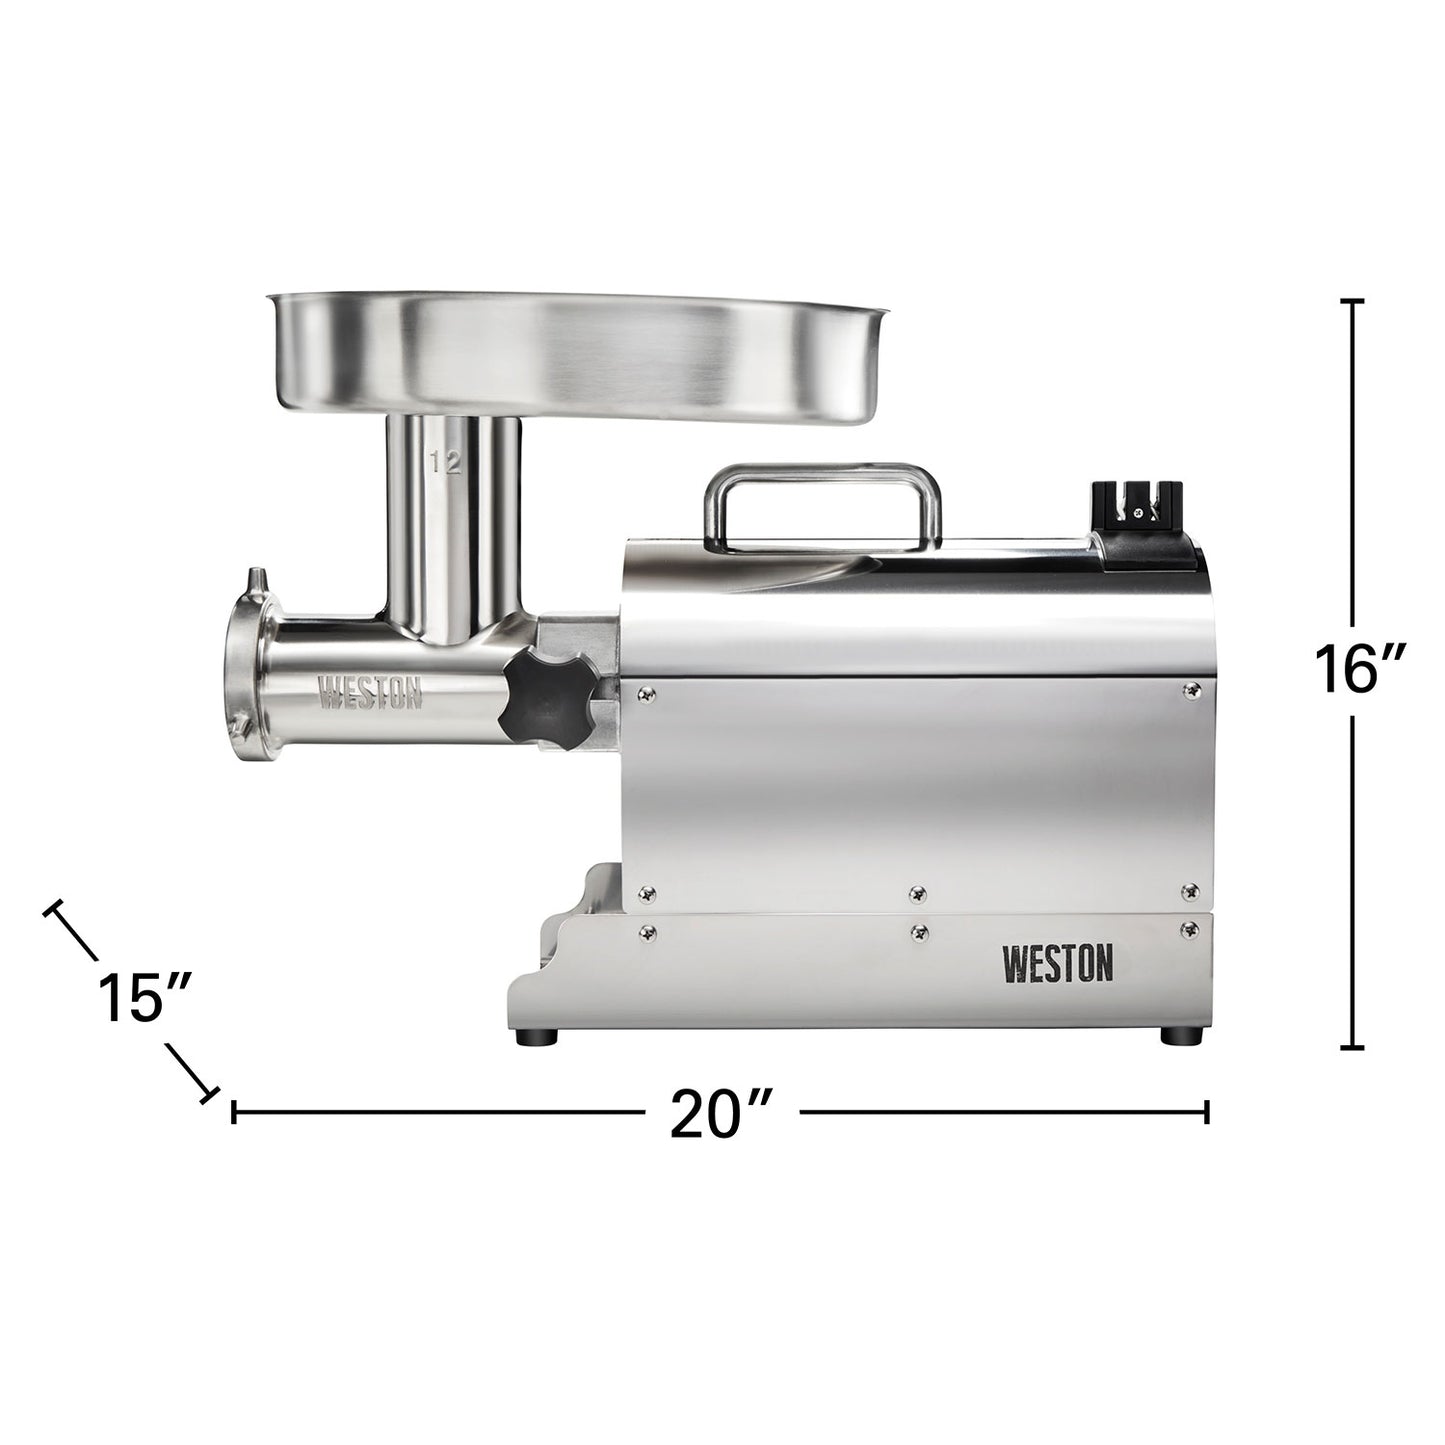 PRO SERIES #12 ELECTRIC MEAT GRINDER